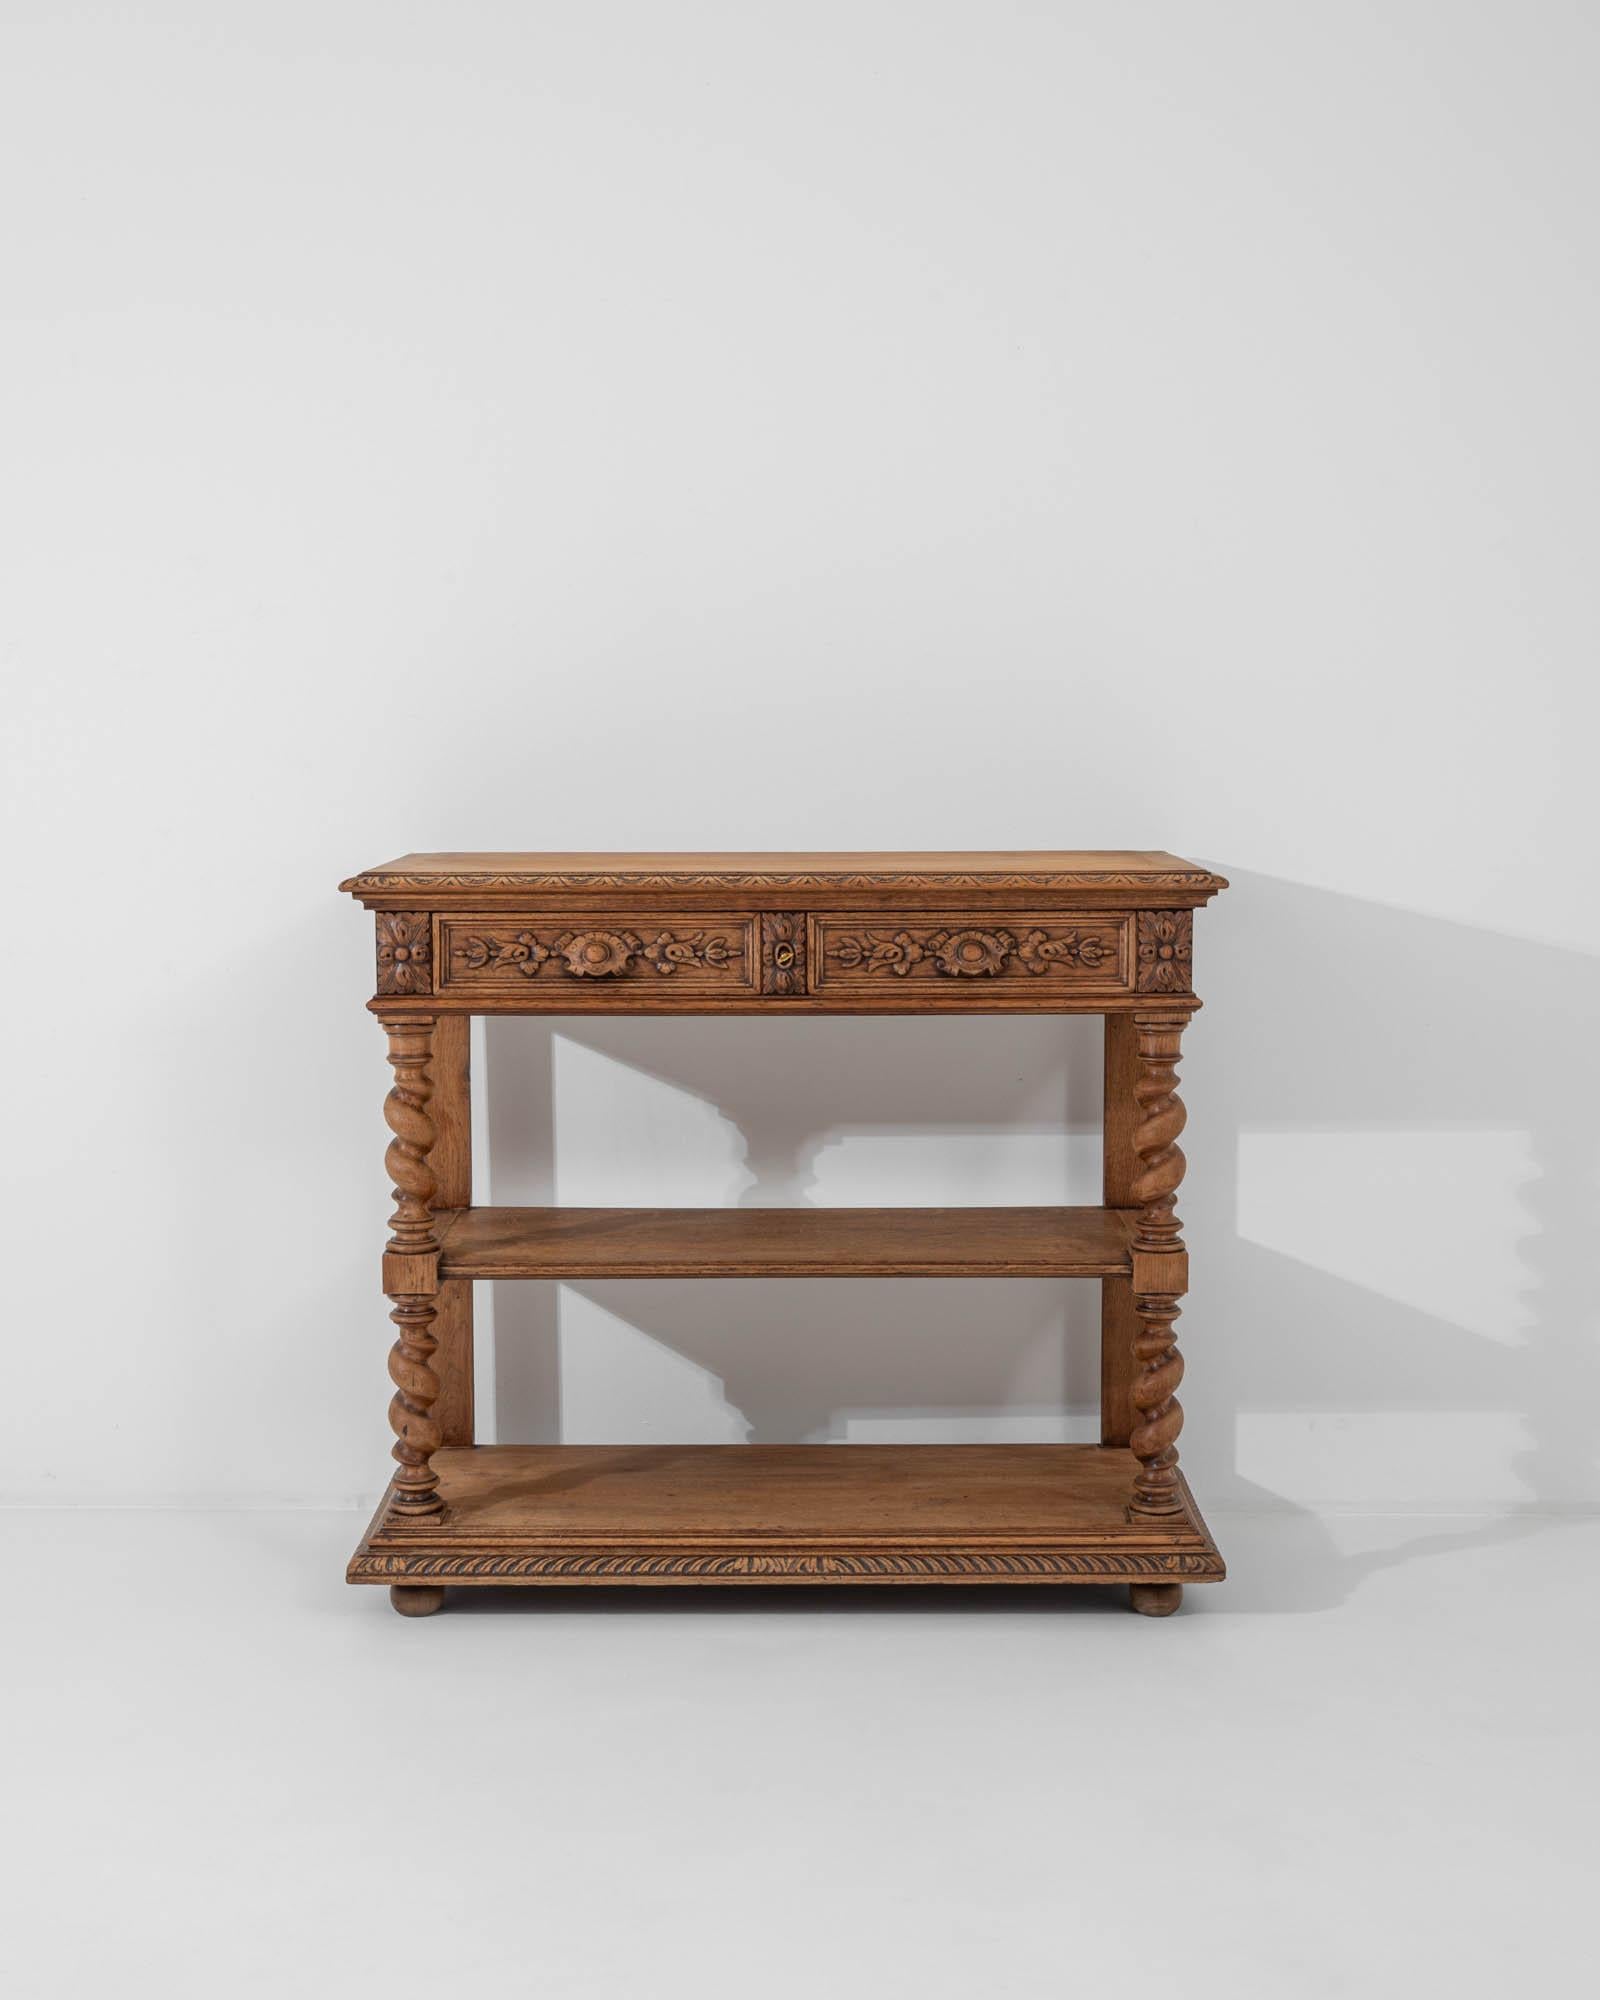 An oak console table created in Belgium, circa 1900. Exuding a bright and cheerful demeanor, this console table greets one with a dignified elegance and a flare for the ornamental. Practical as well as stylish, the table top folds open to create a